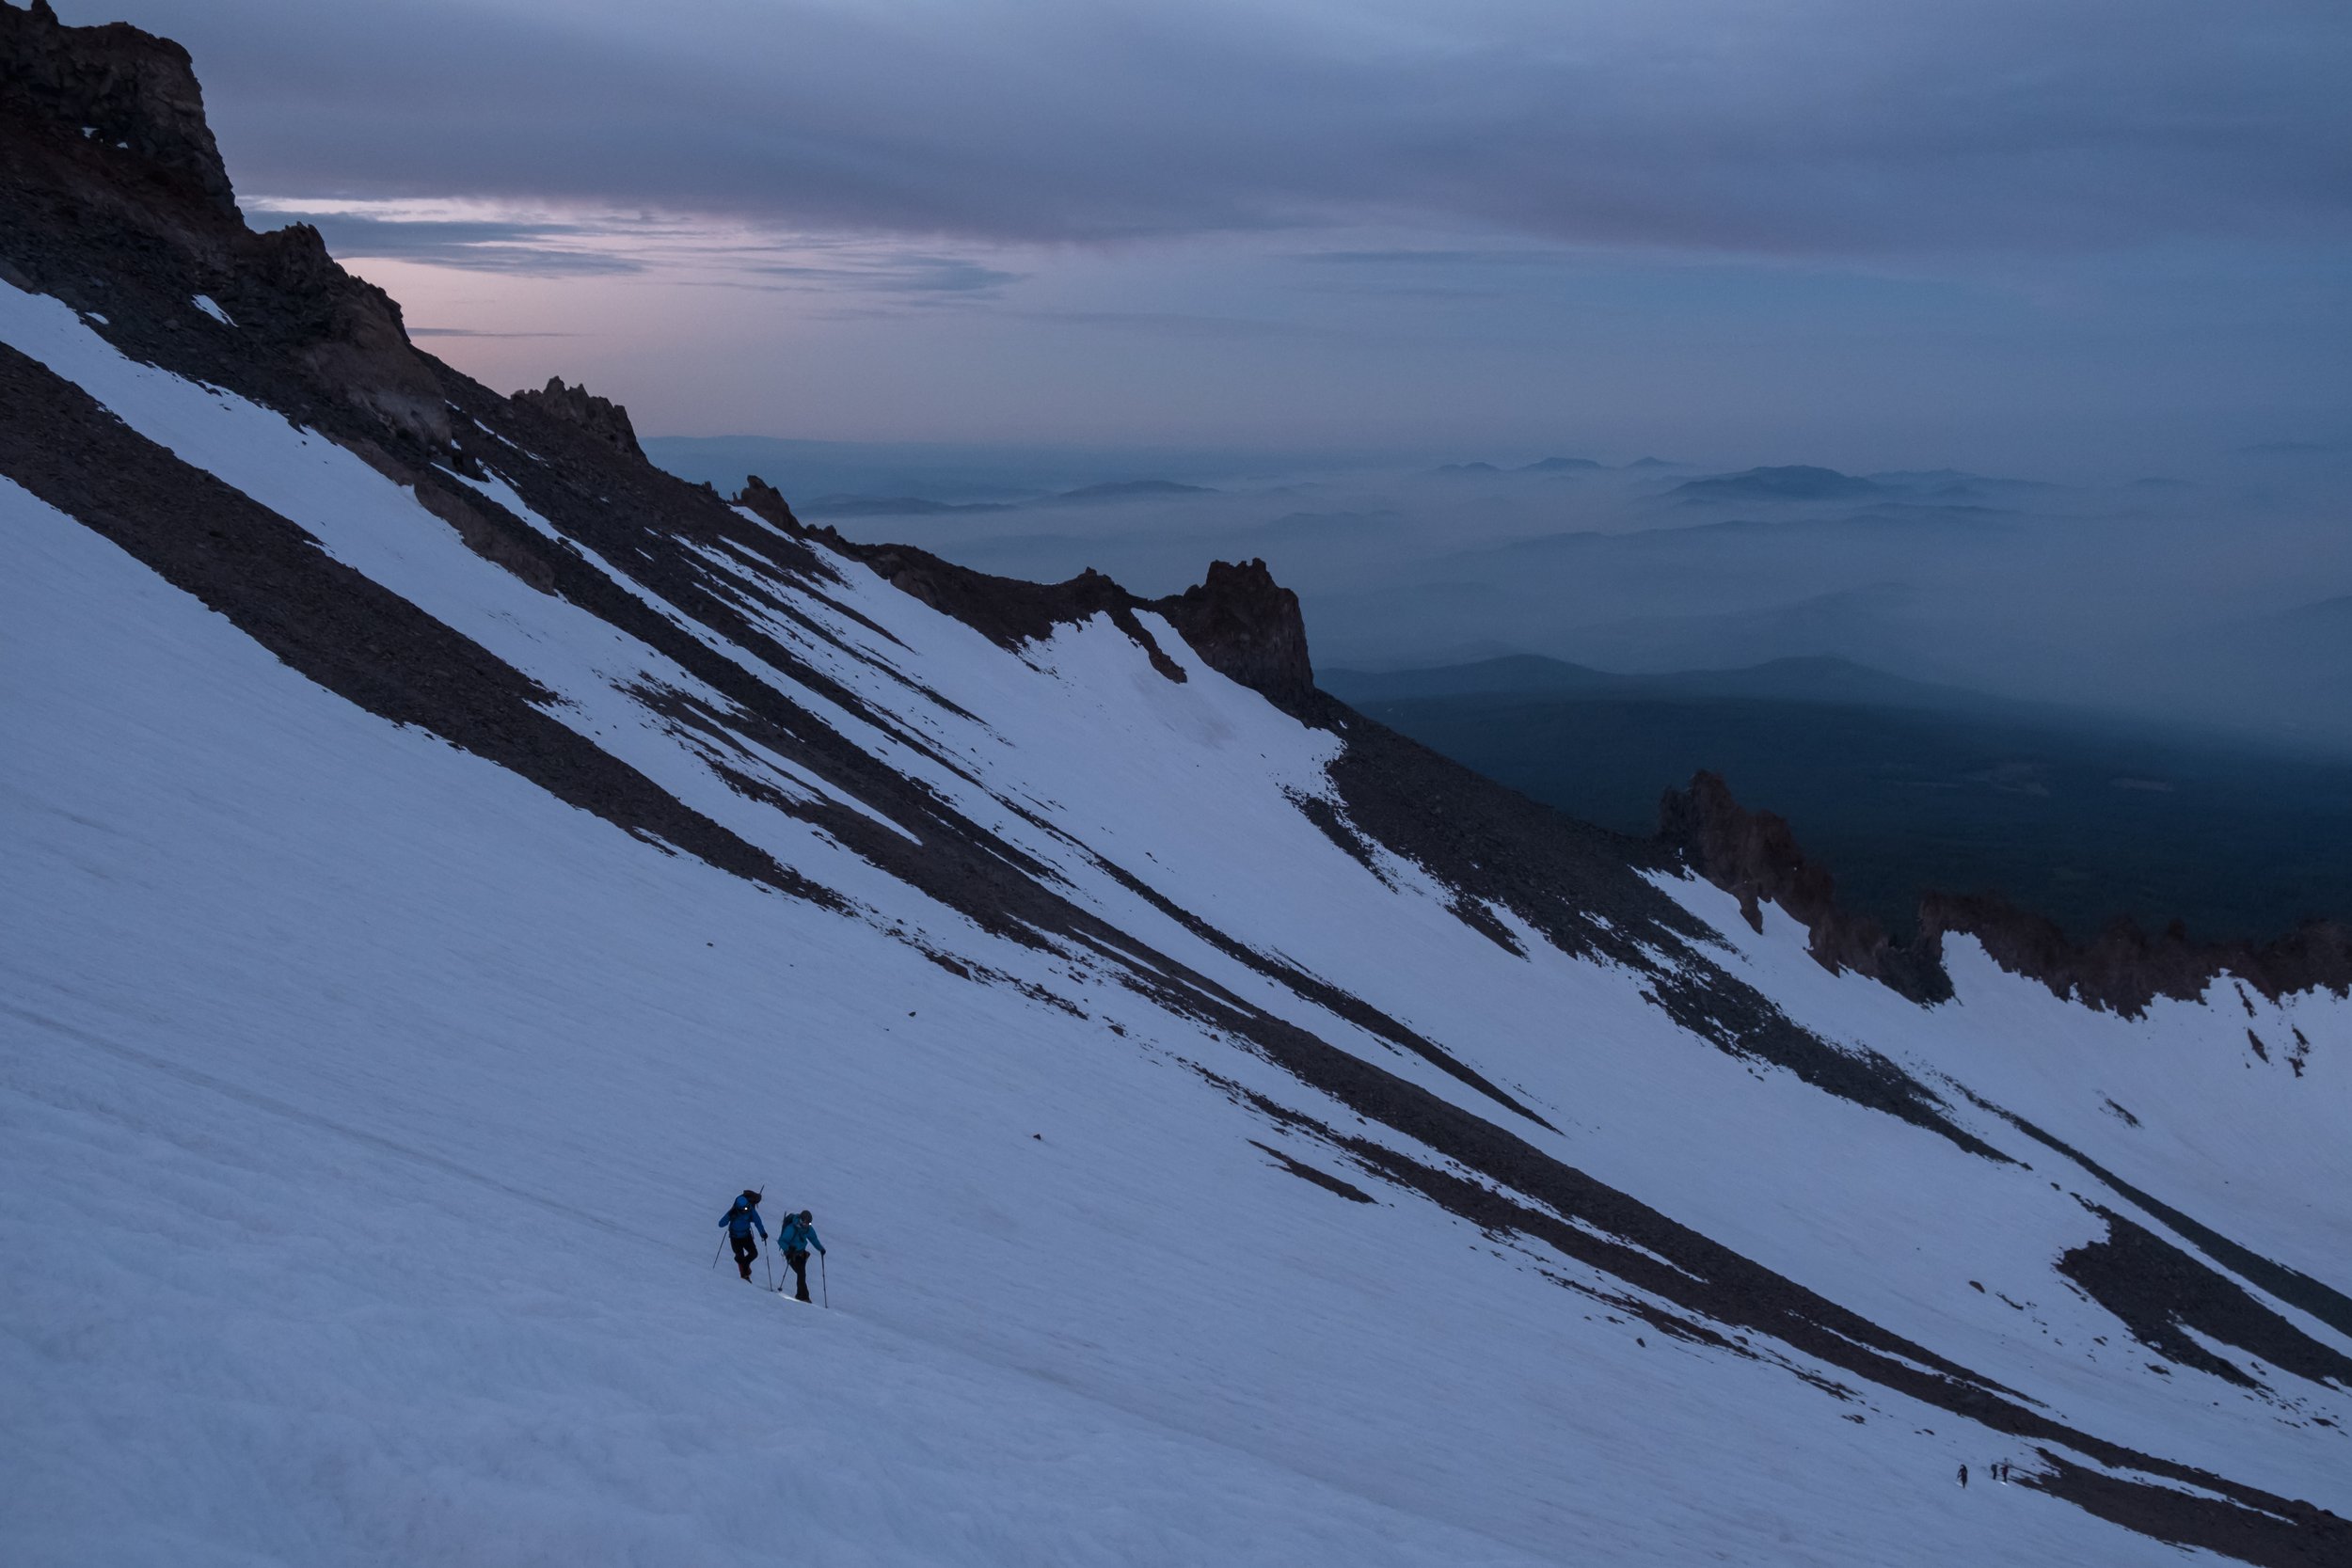 Climbers push their way to the summit of mt shasta